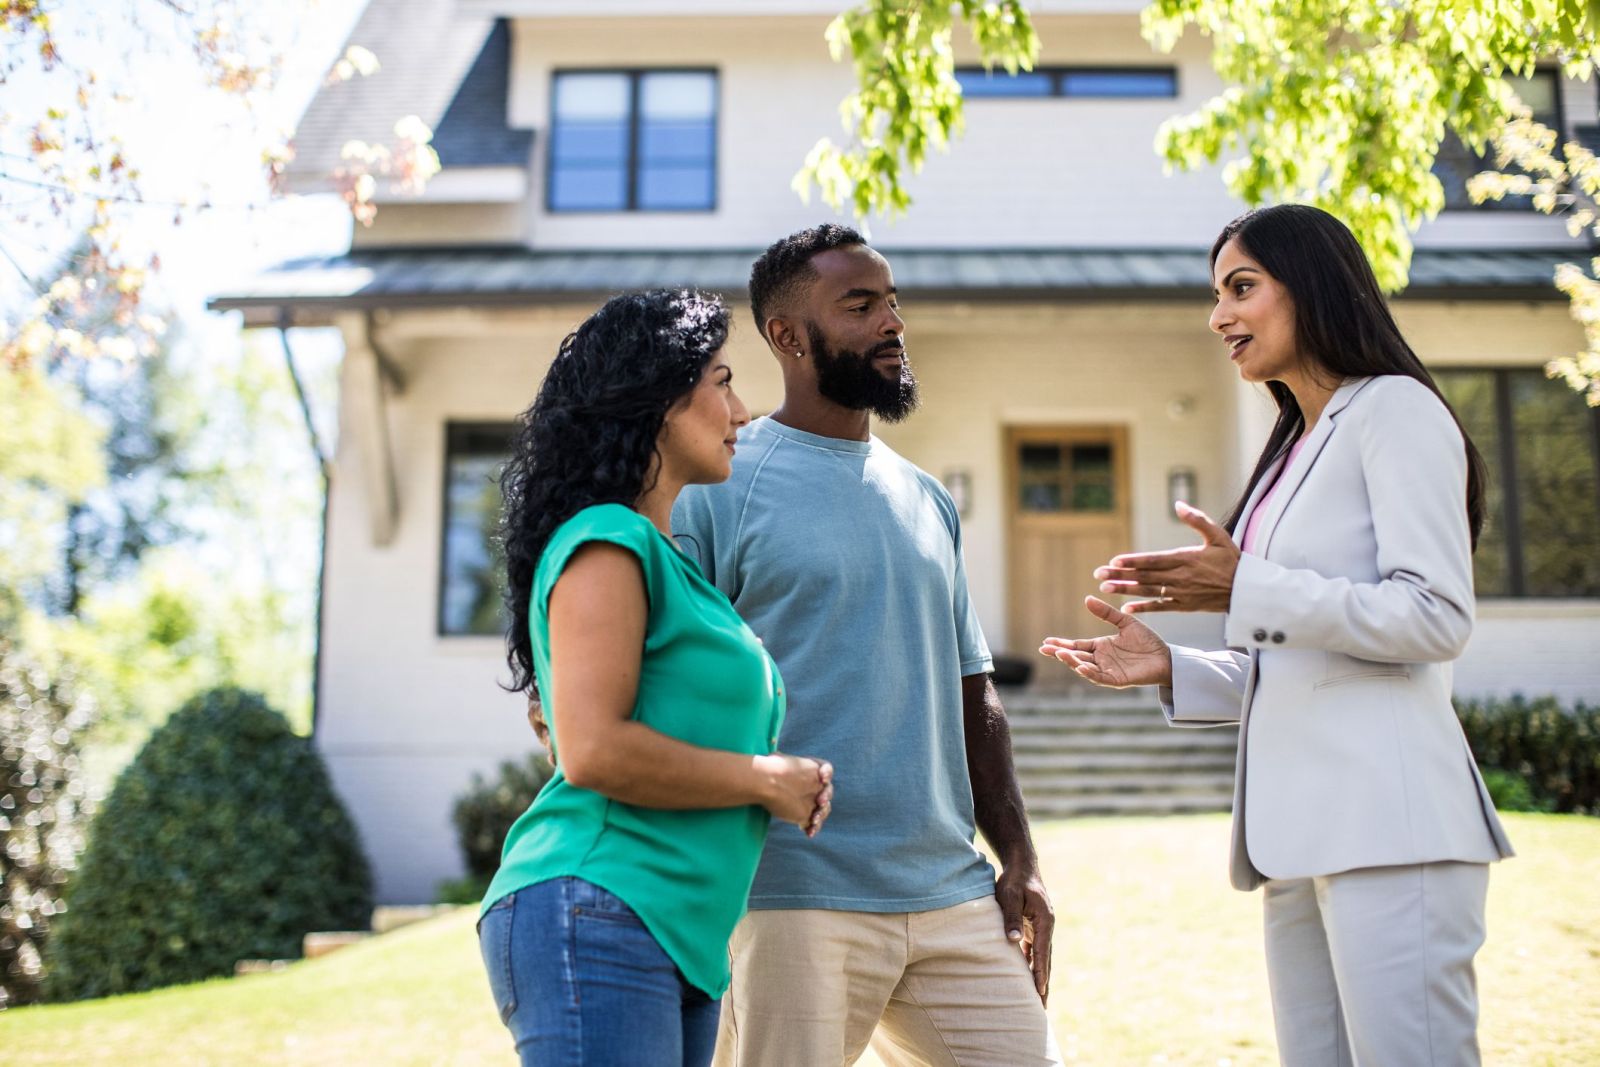 Get a Buyer’s Agent to Save Your Money